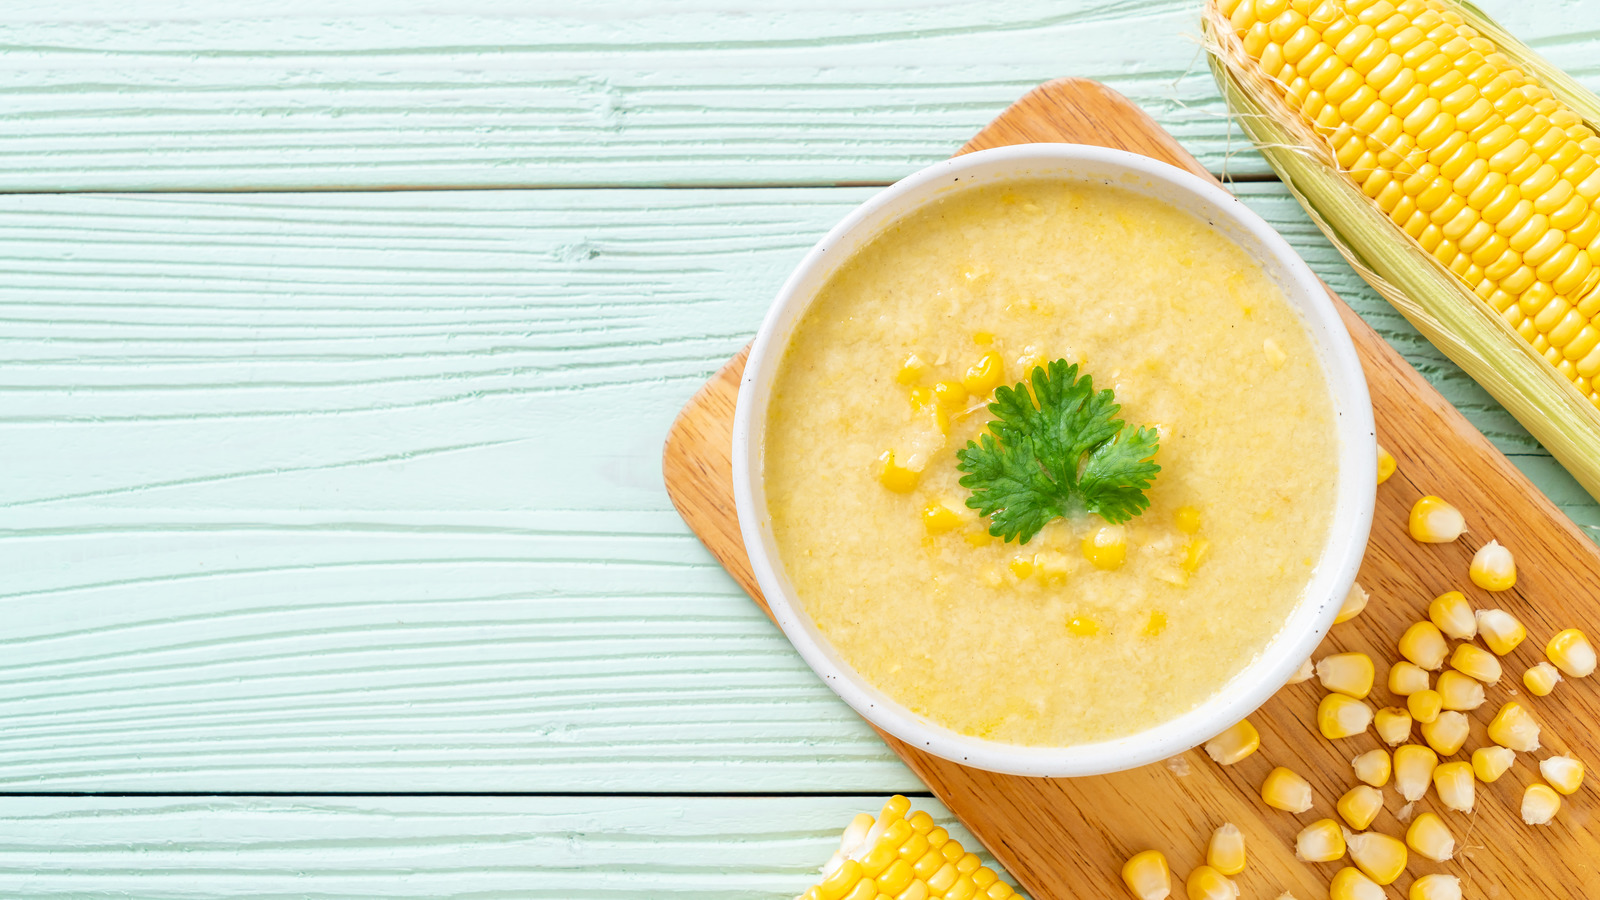 Here's What You Can Do To Thicken Creamed Corn - Mashed